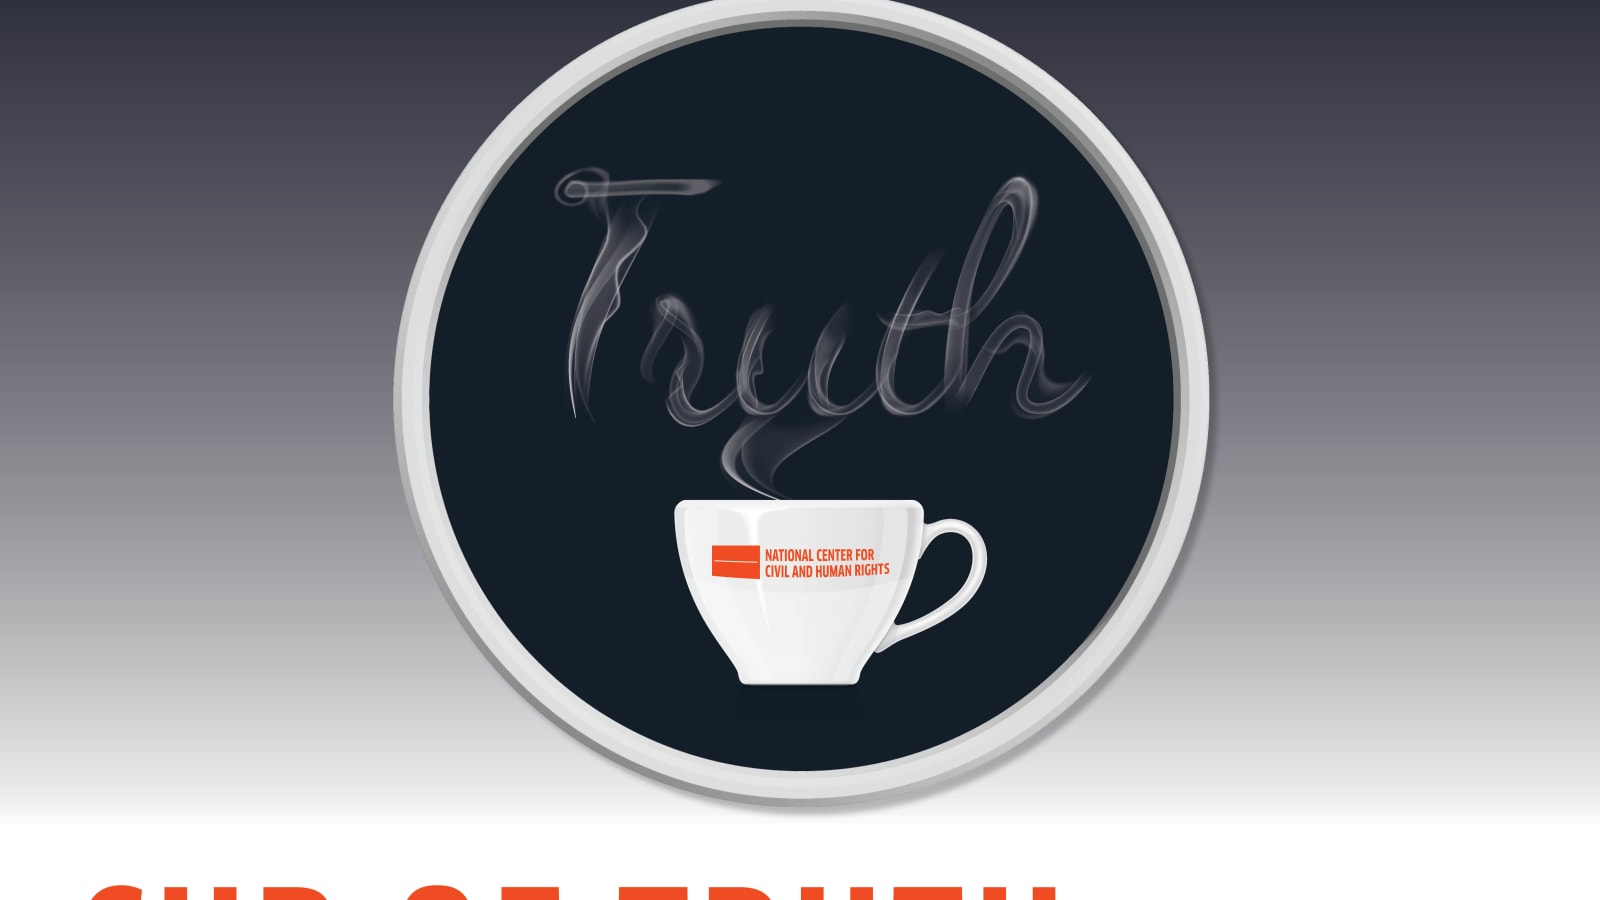 Cup of Truth